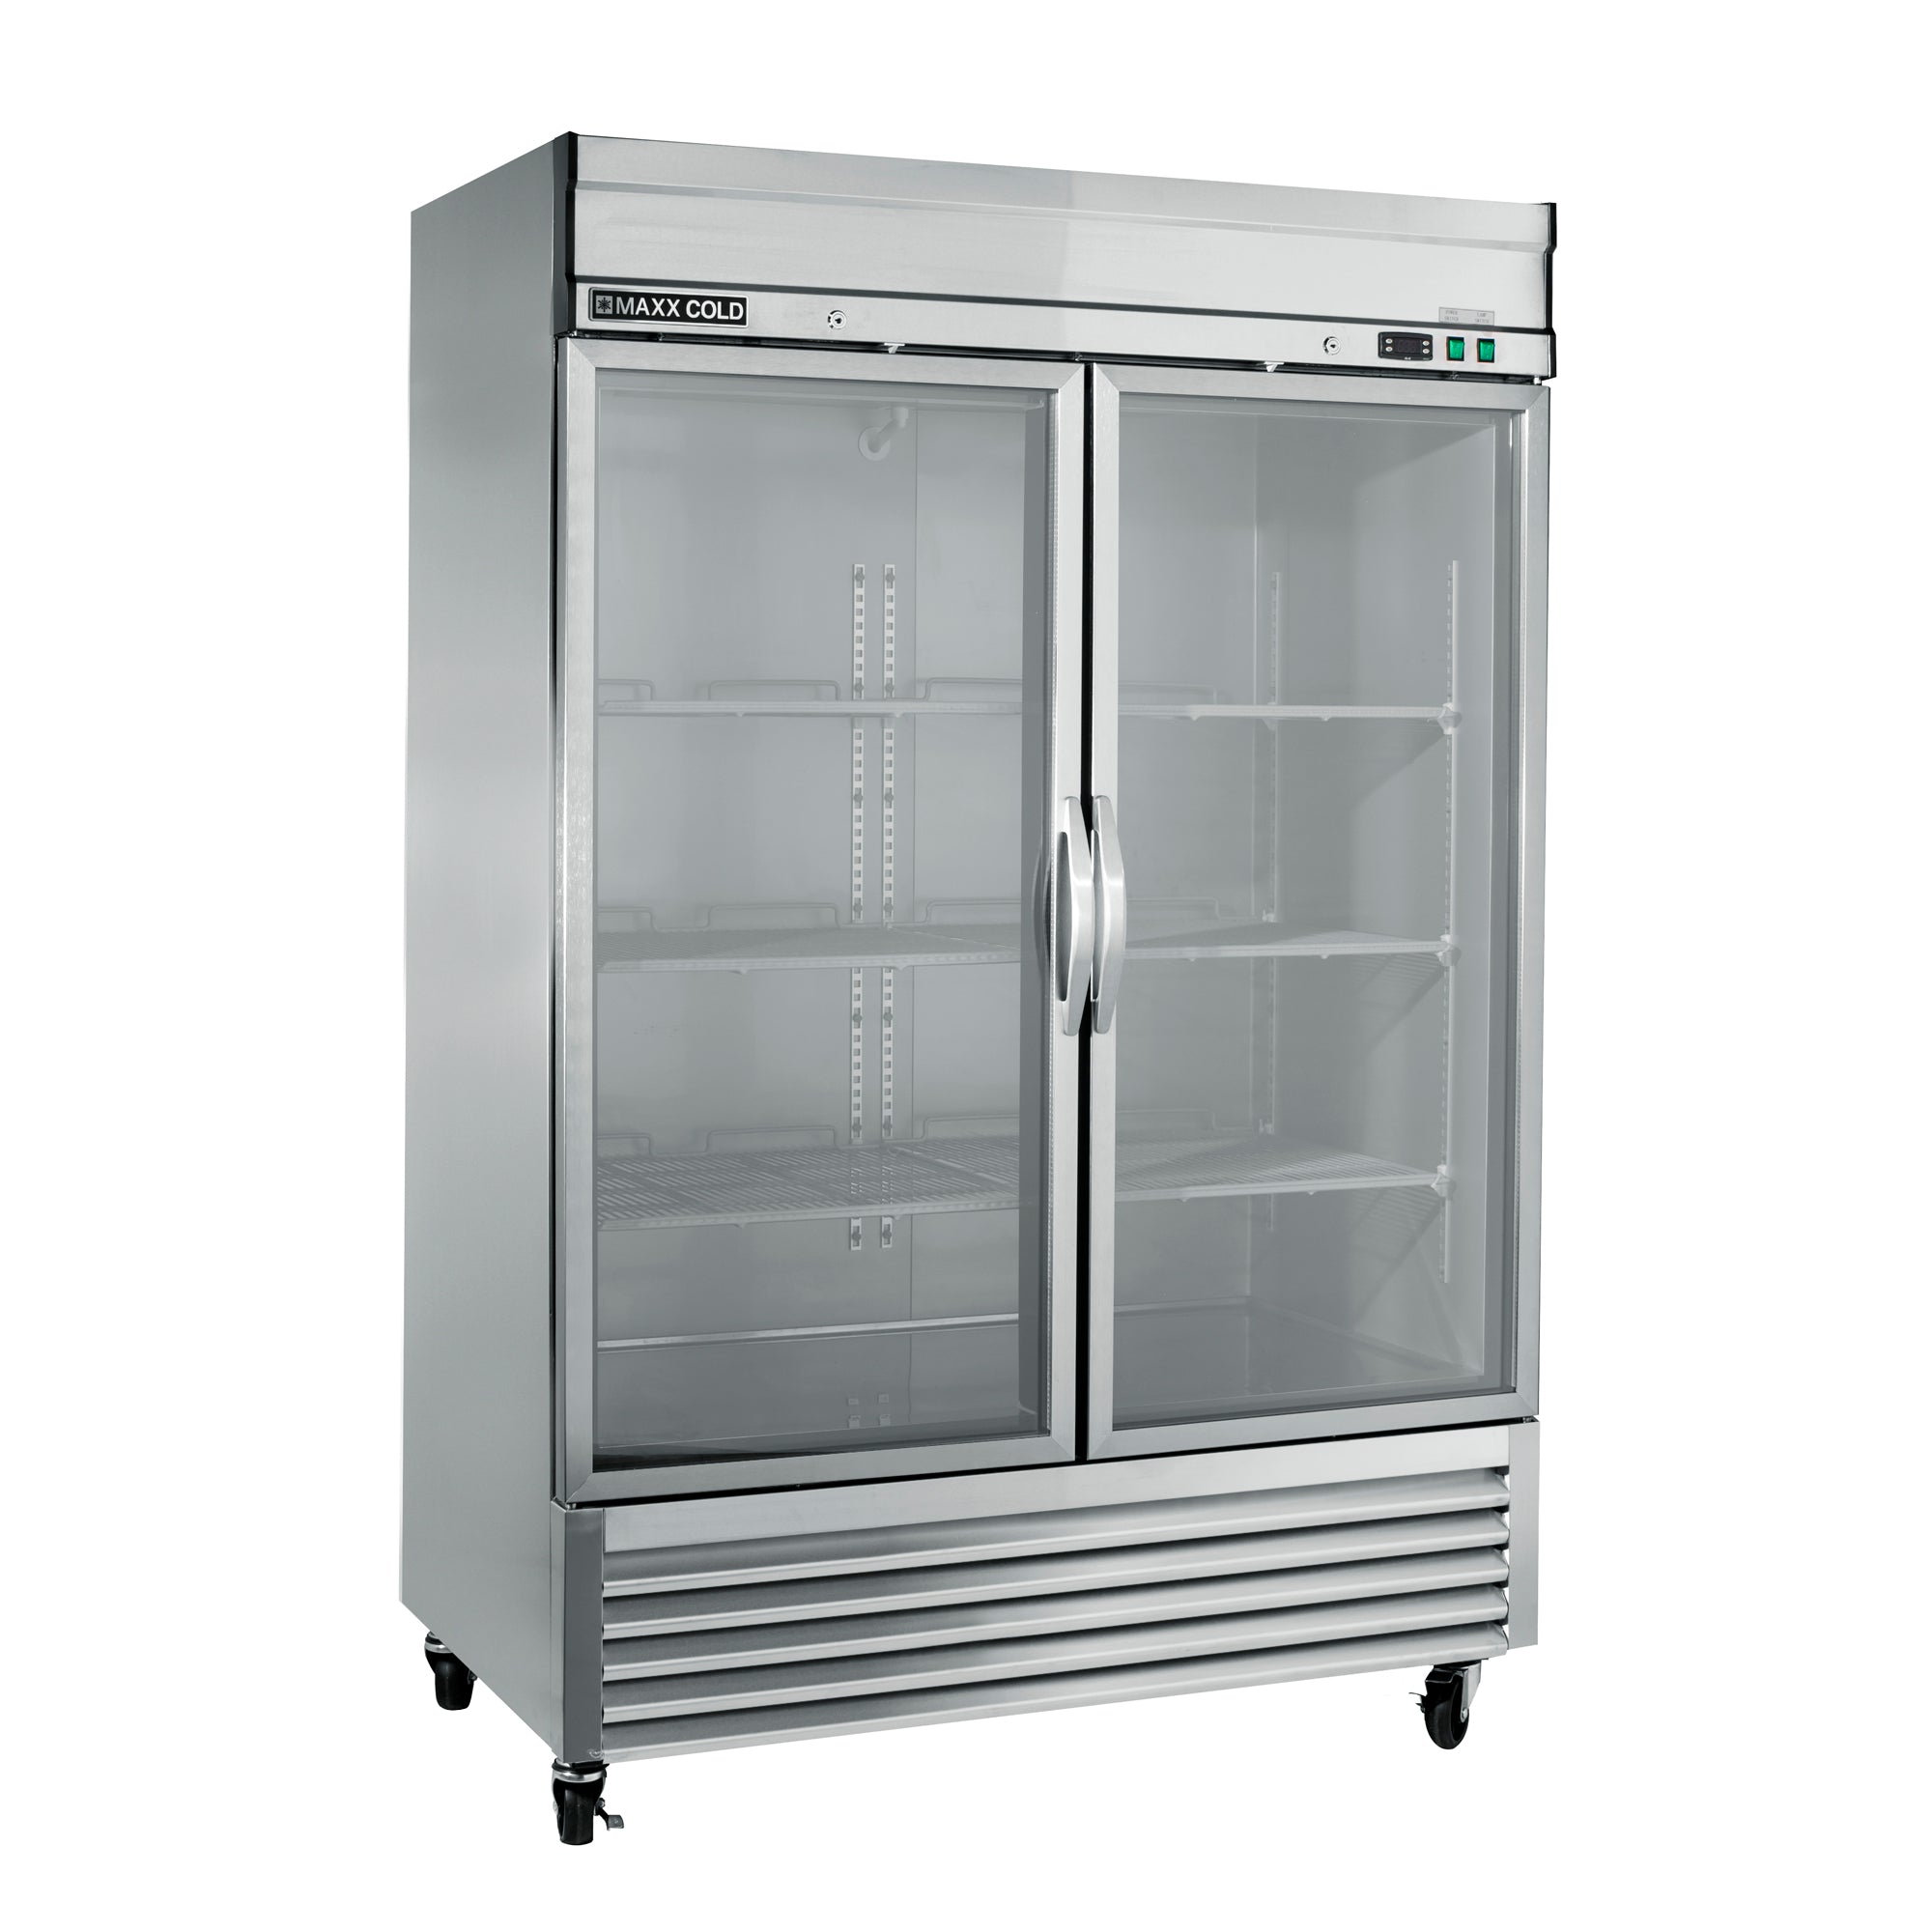 Maxx Cold - MXSR-49GDHC, Maxx Cold Double Glass Door Reach-In Refrigerator, Bottom Mount, 54"W, 49 cu. ft. Storage Capacity, in Stainless Steel